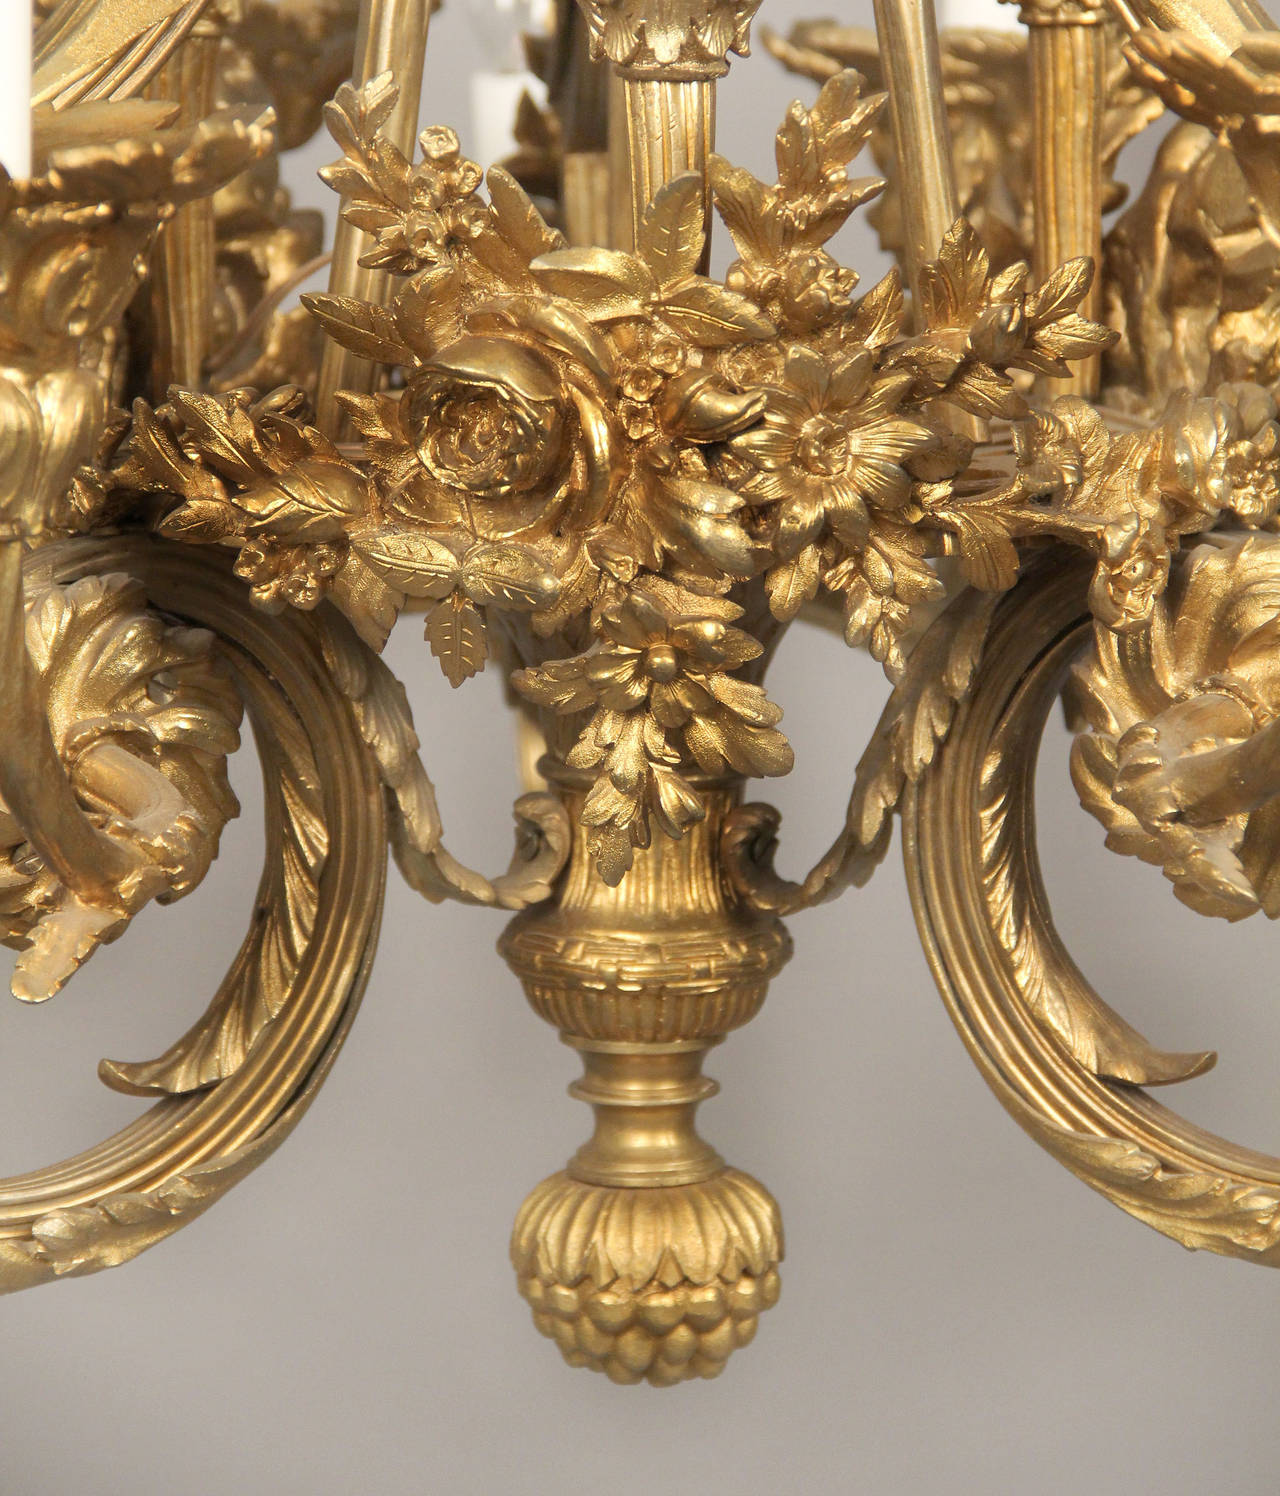 A fine late 19th century gilt bronze twelve-light chandelier.

Great quality bronze casted frame, bottom center with a basket and flowers, foliate scrolled arms, the top with flowers and bows. Twelve tiered perimeter lights.

If you are looking